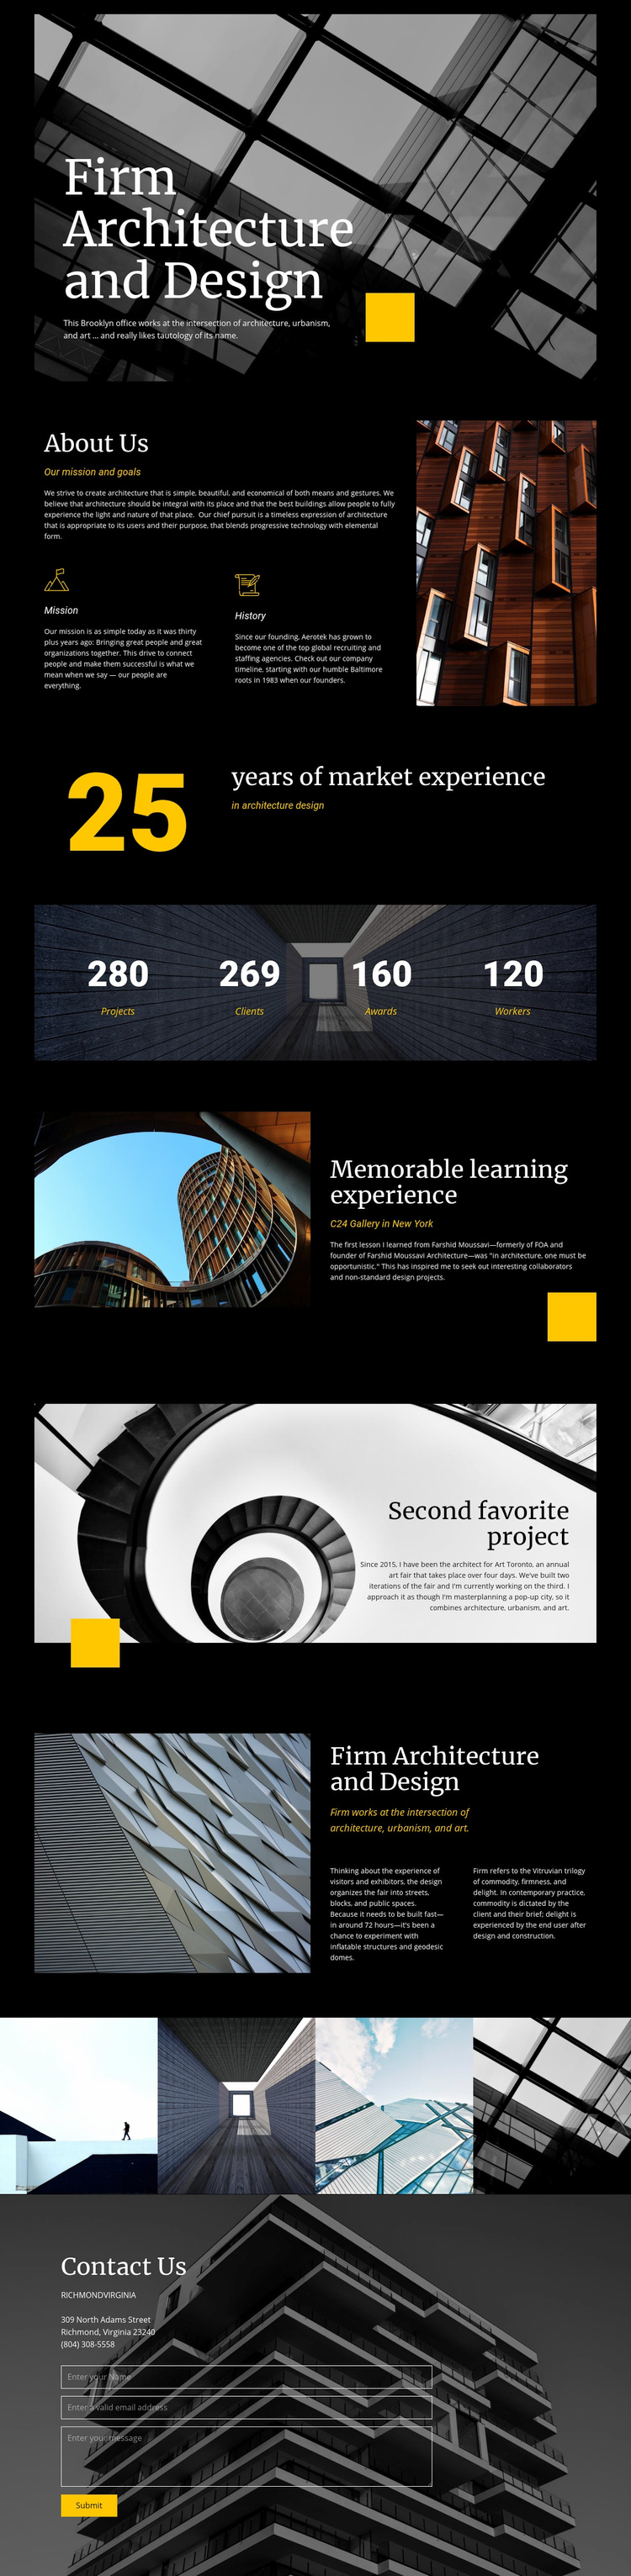 Firm architecture and Design Wix Template Alternative